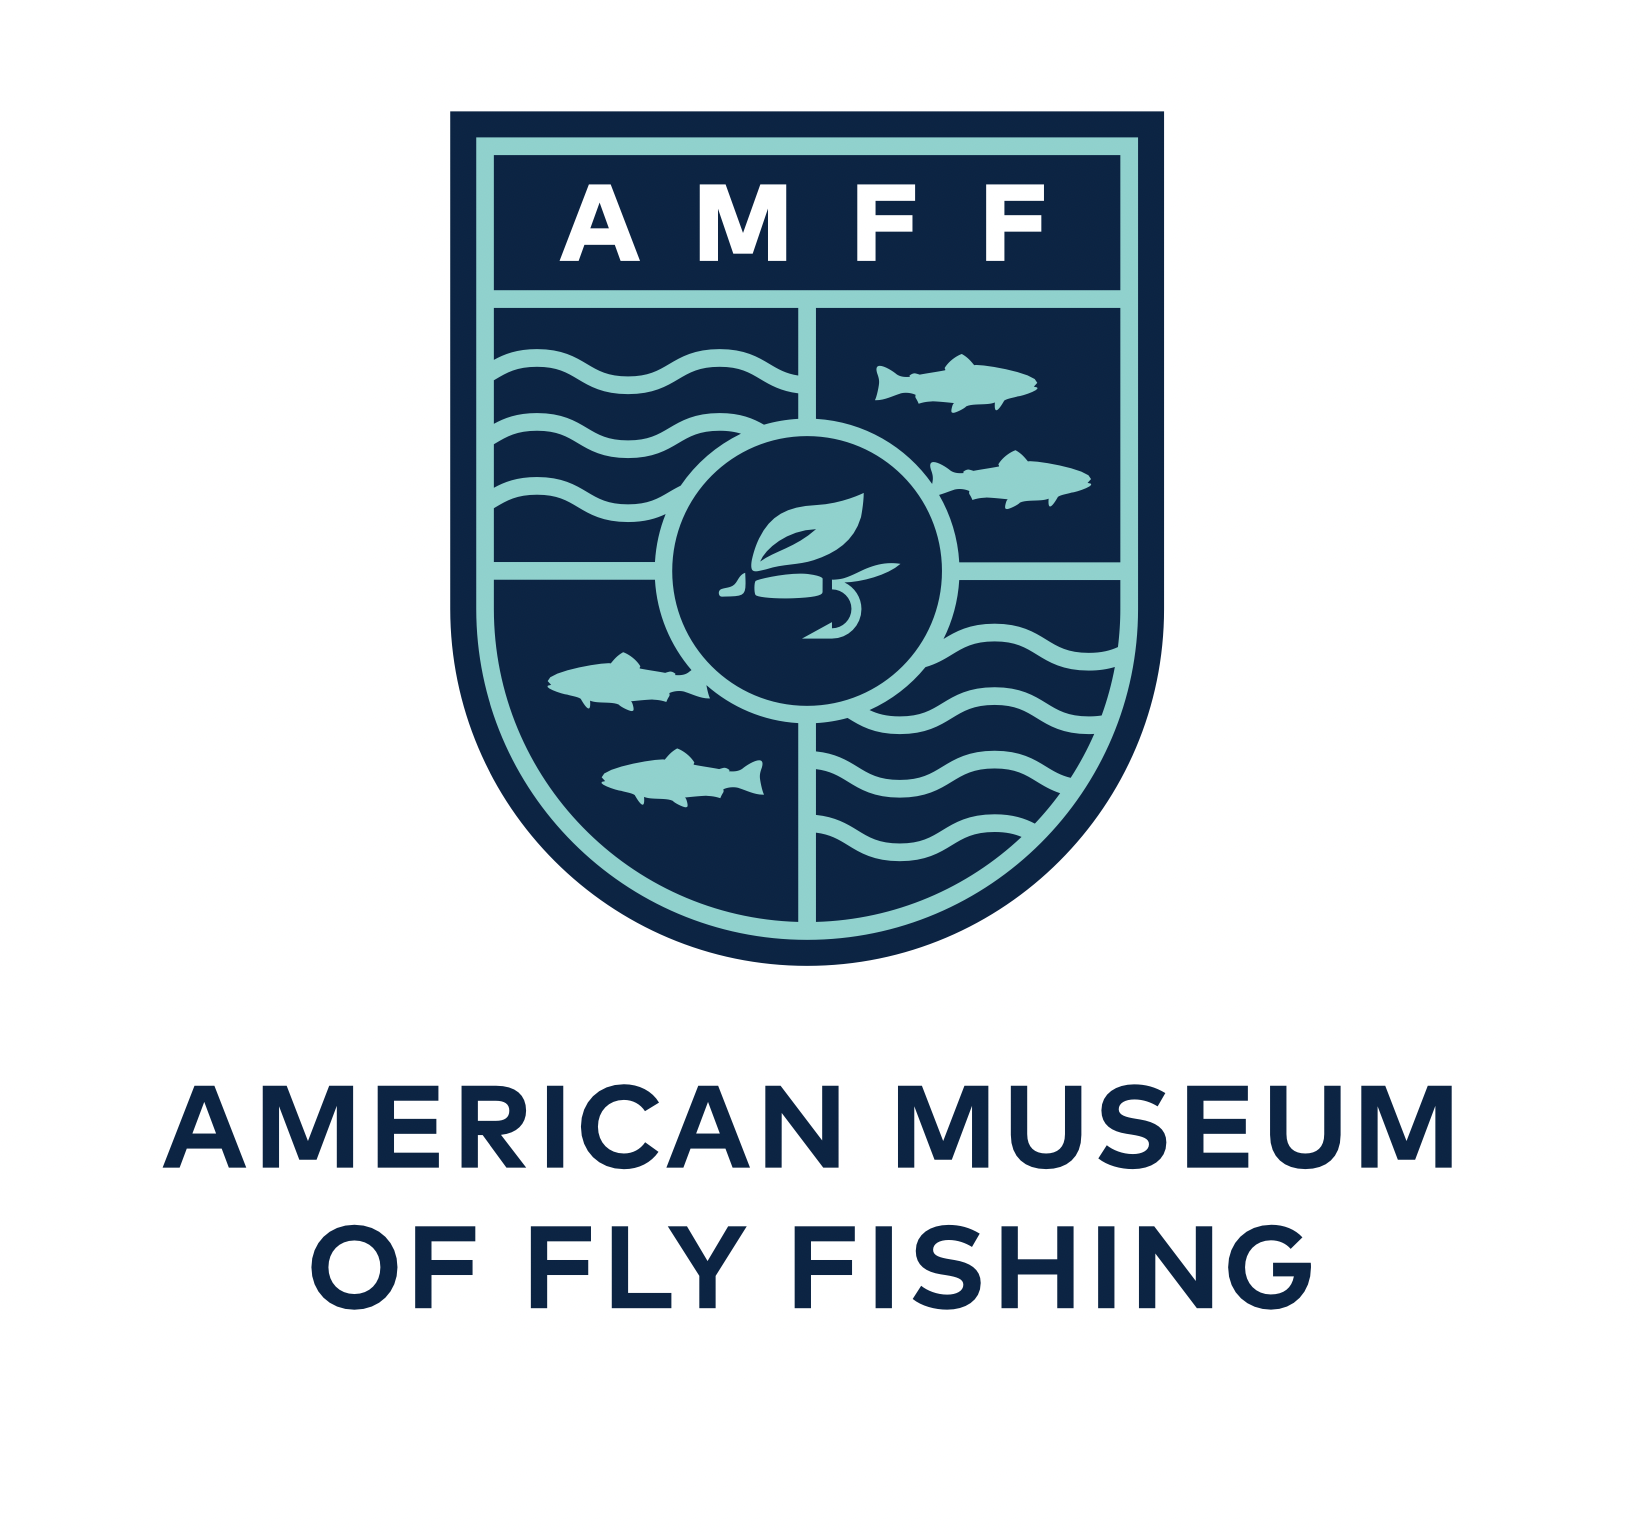 amff, Author at American Museum Of Fly Fishing